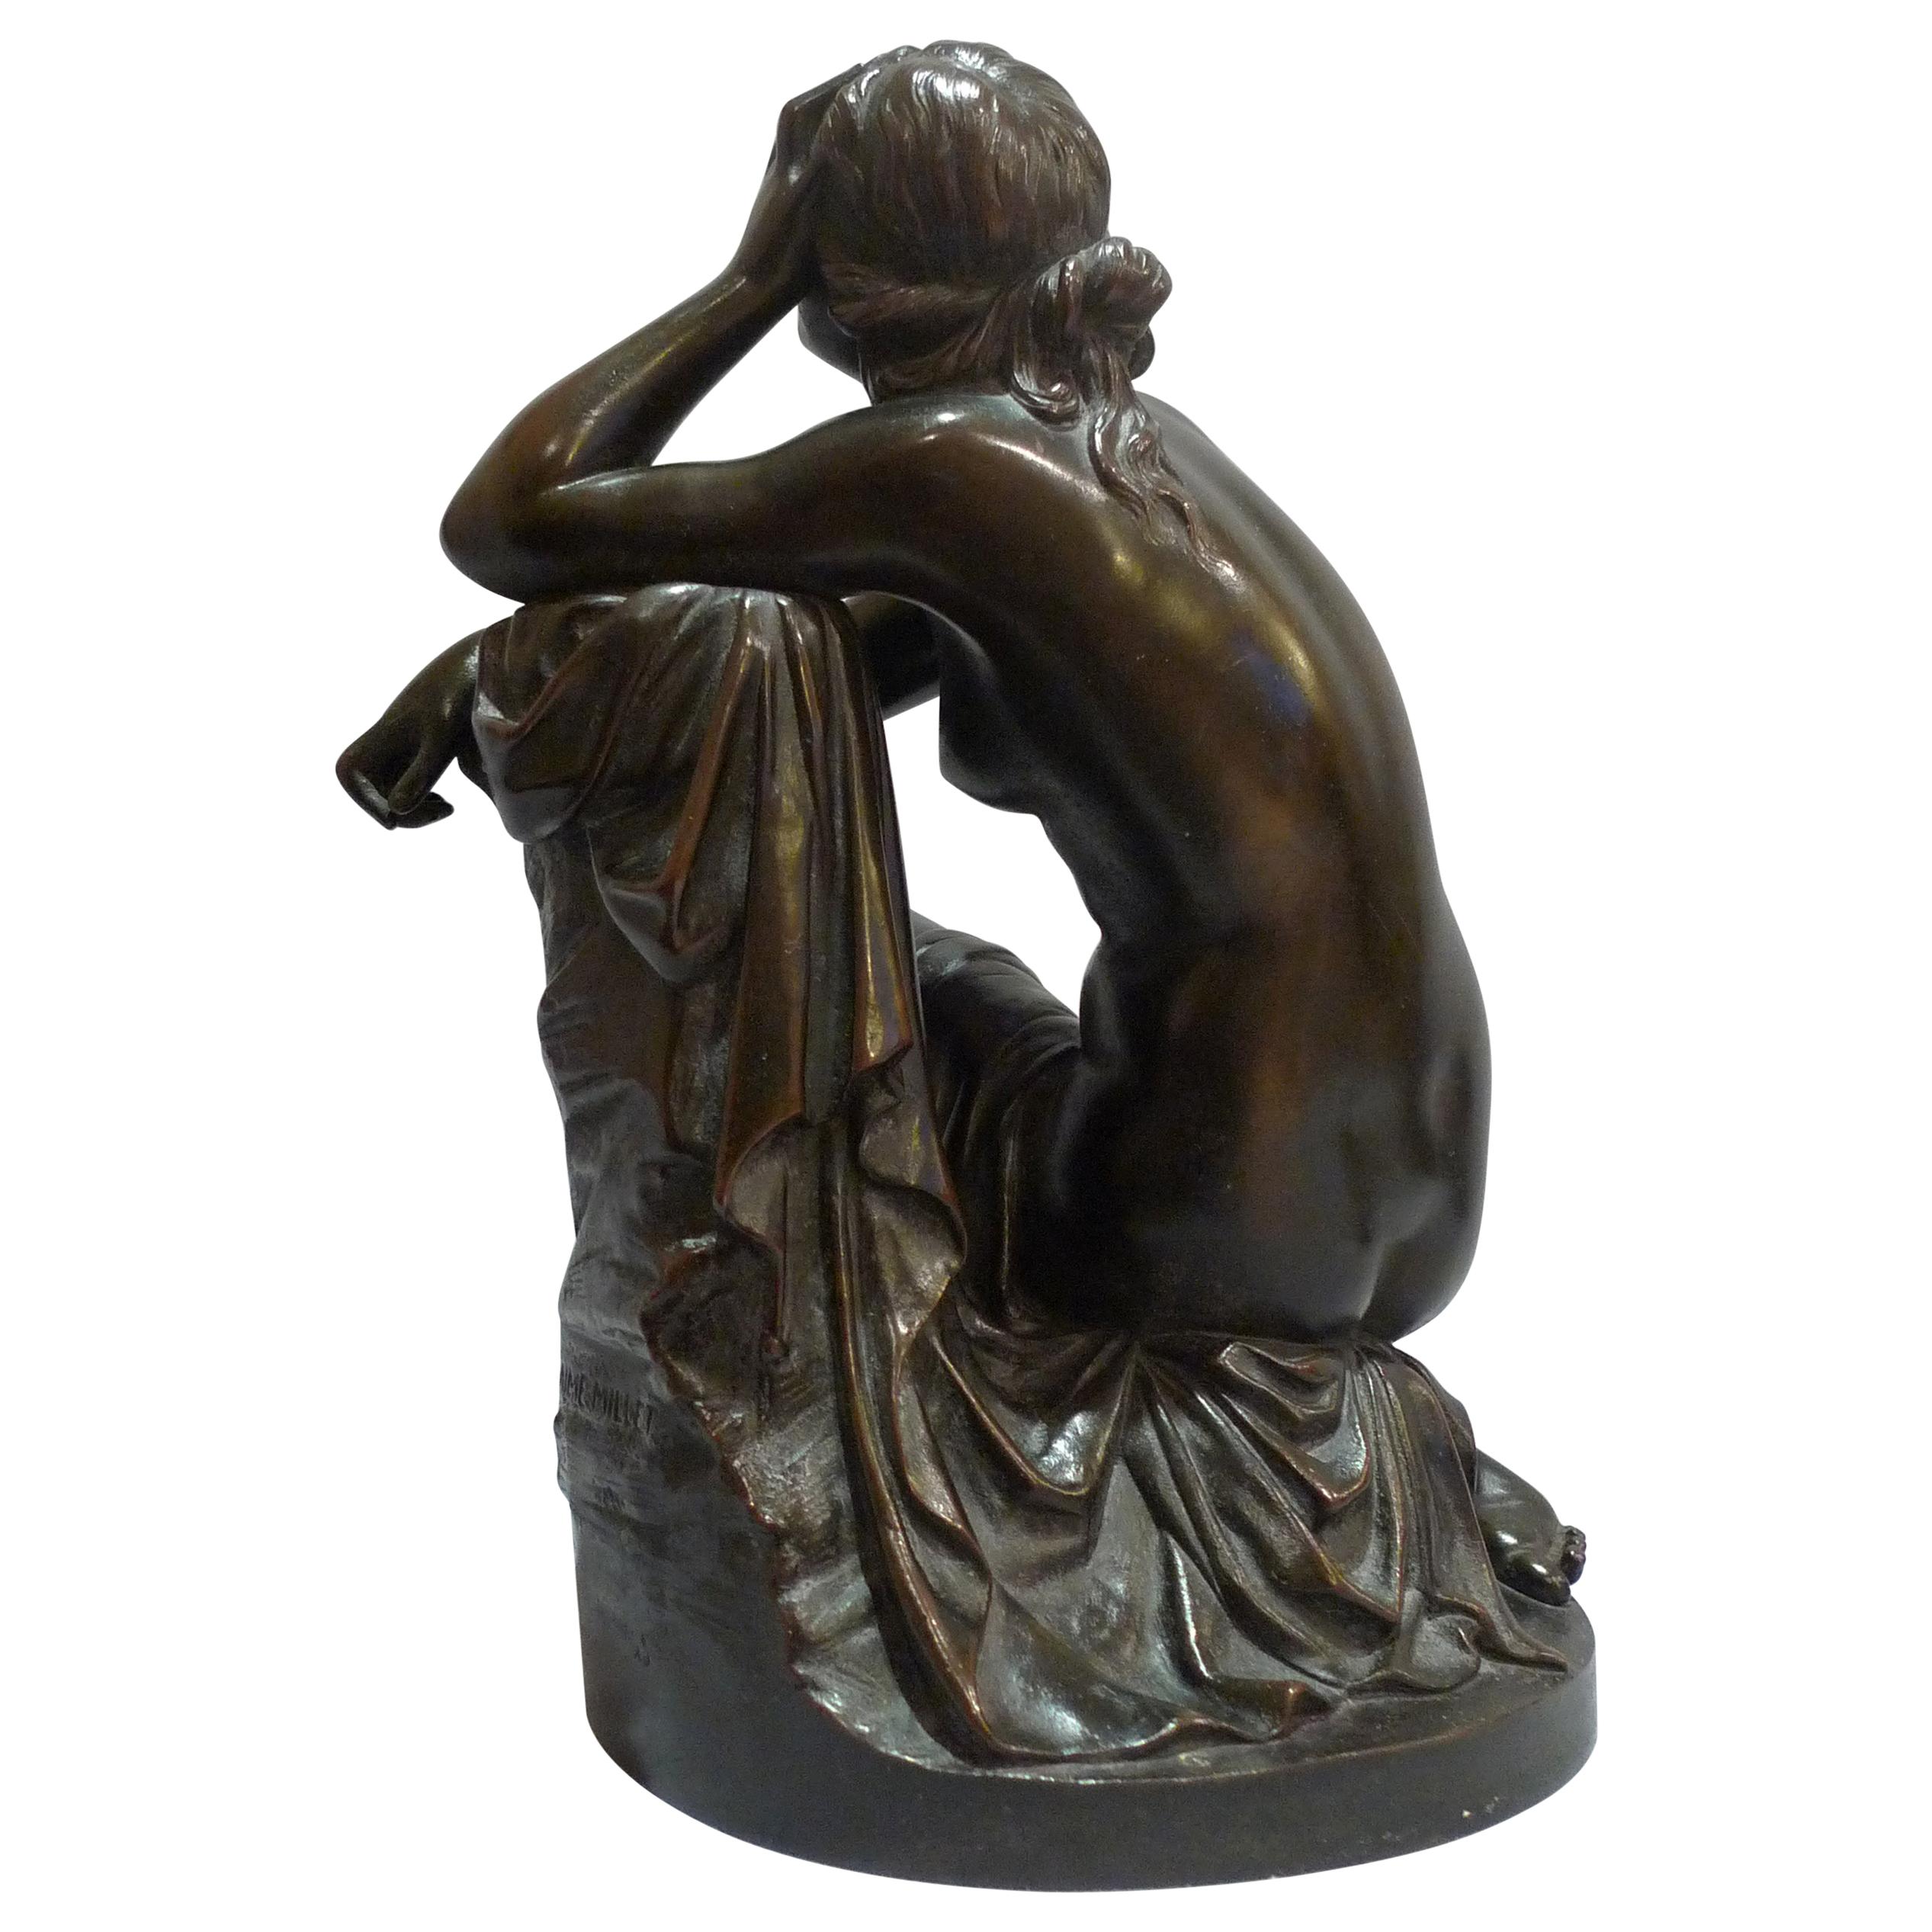 Aime Millet Bronze Nude of Young Woman "The Disconsolate Ariadne"